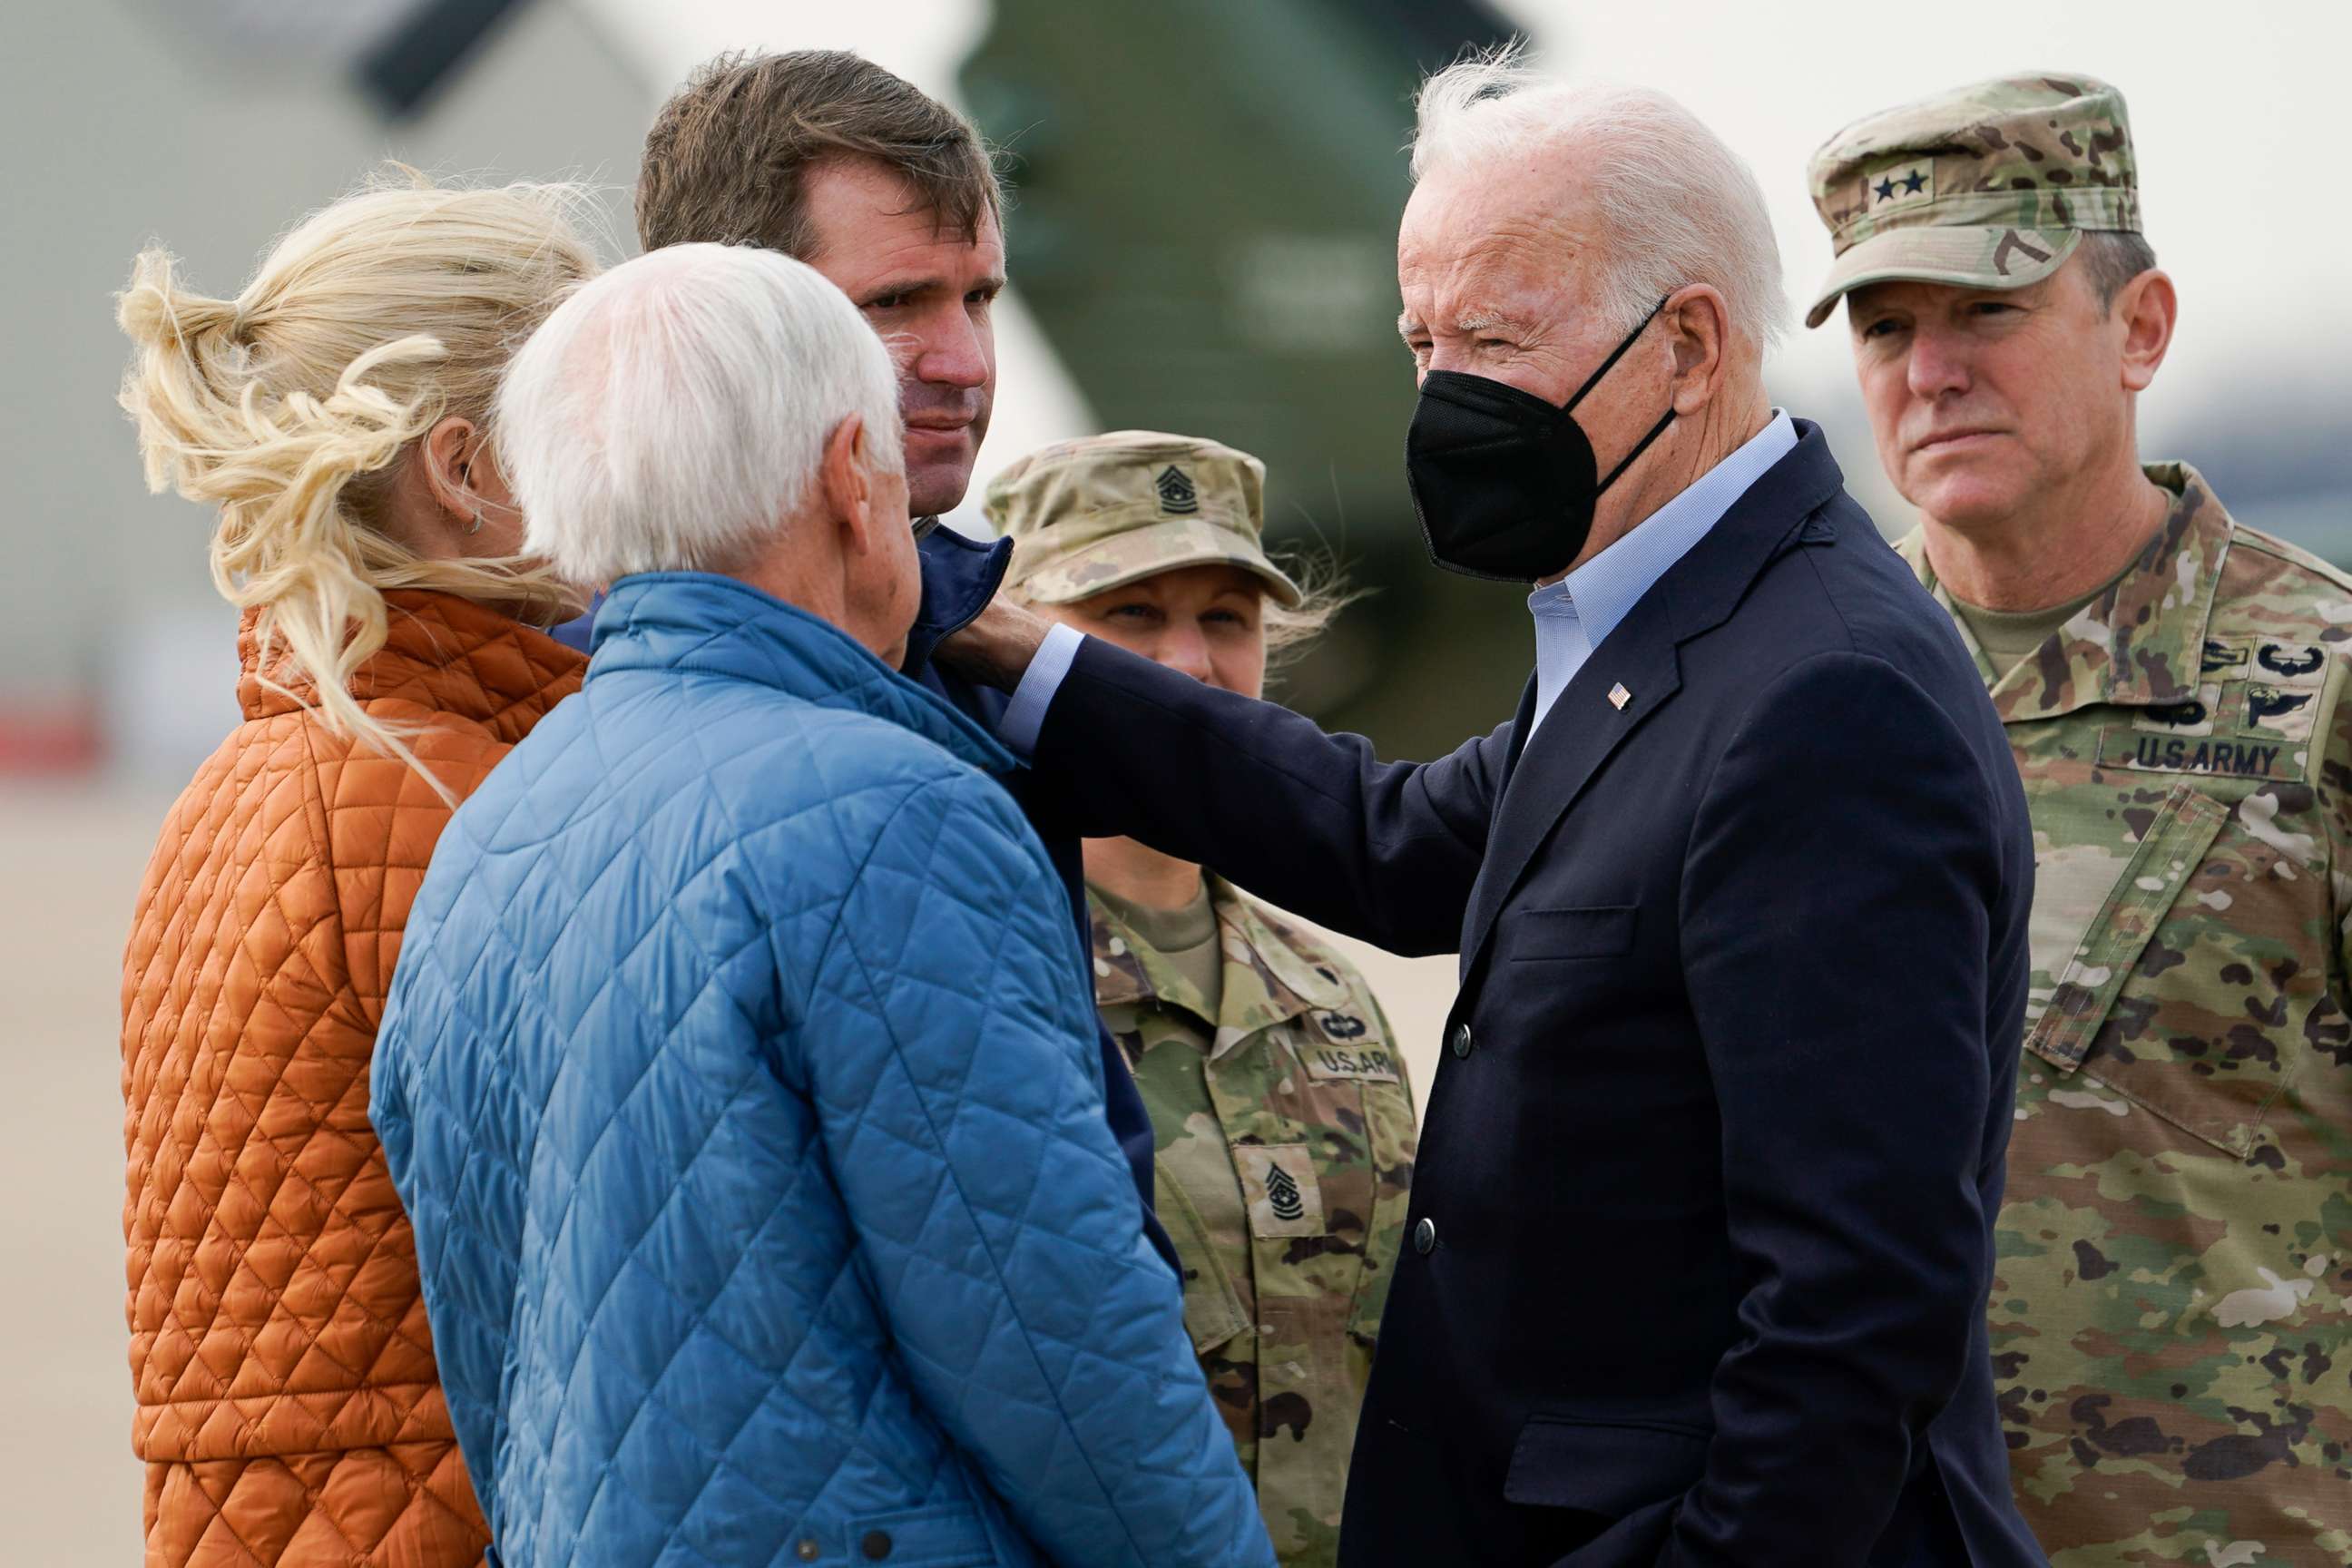 PHOTO: President Joe Biden greets Kentucky Gov. Andy Beshear and his wife Britainy Beshear as he arrives in Fort Campbell, Ky., Dec. 15, 2021, to survey storm damage from tornadoes and extreme weather. 